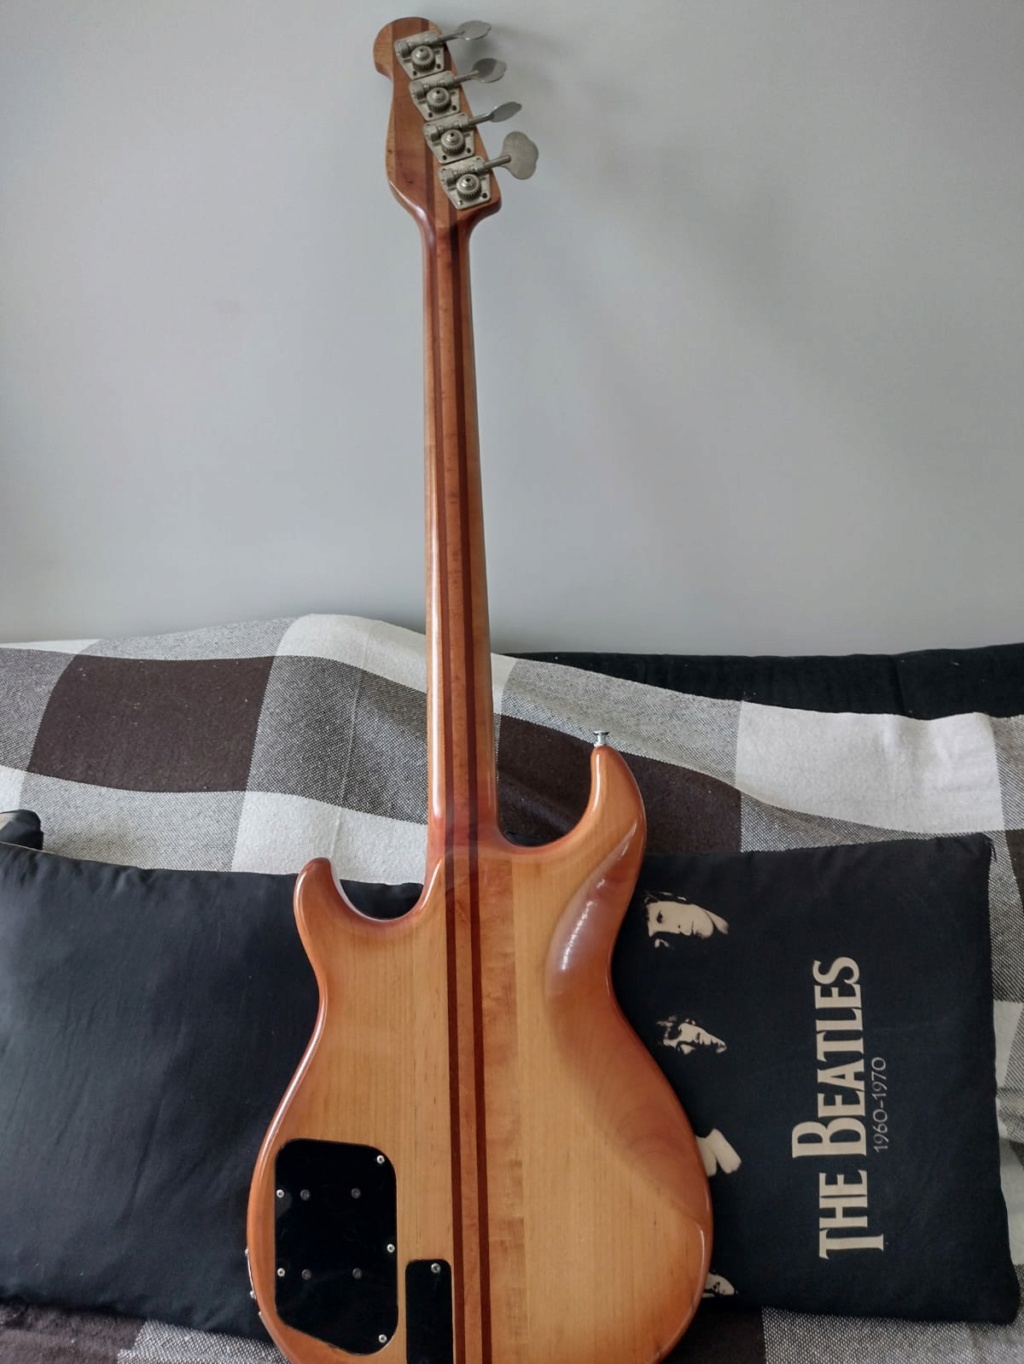 Clube Japanese Basses from the '80s - Página 5 Whatsa48